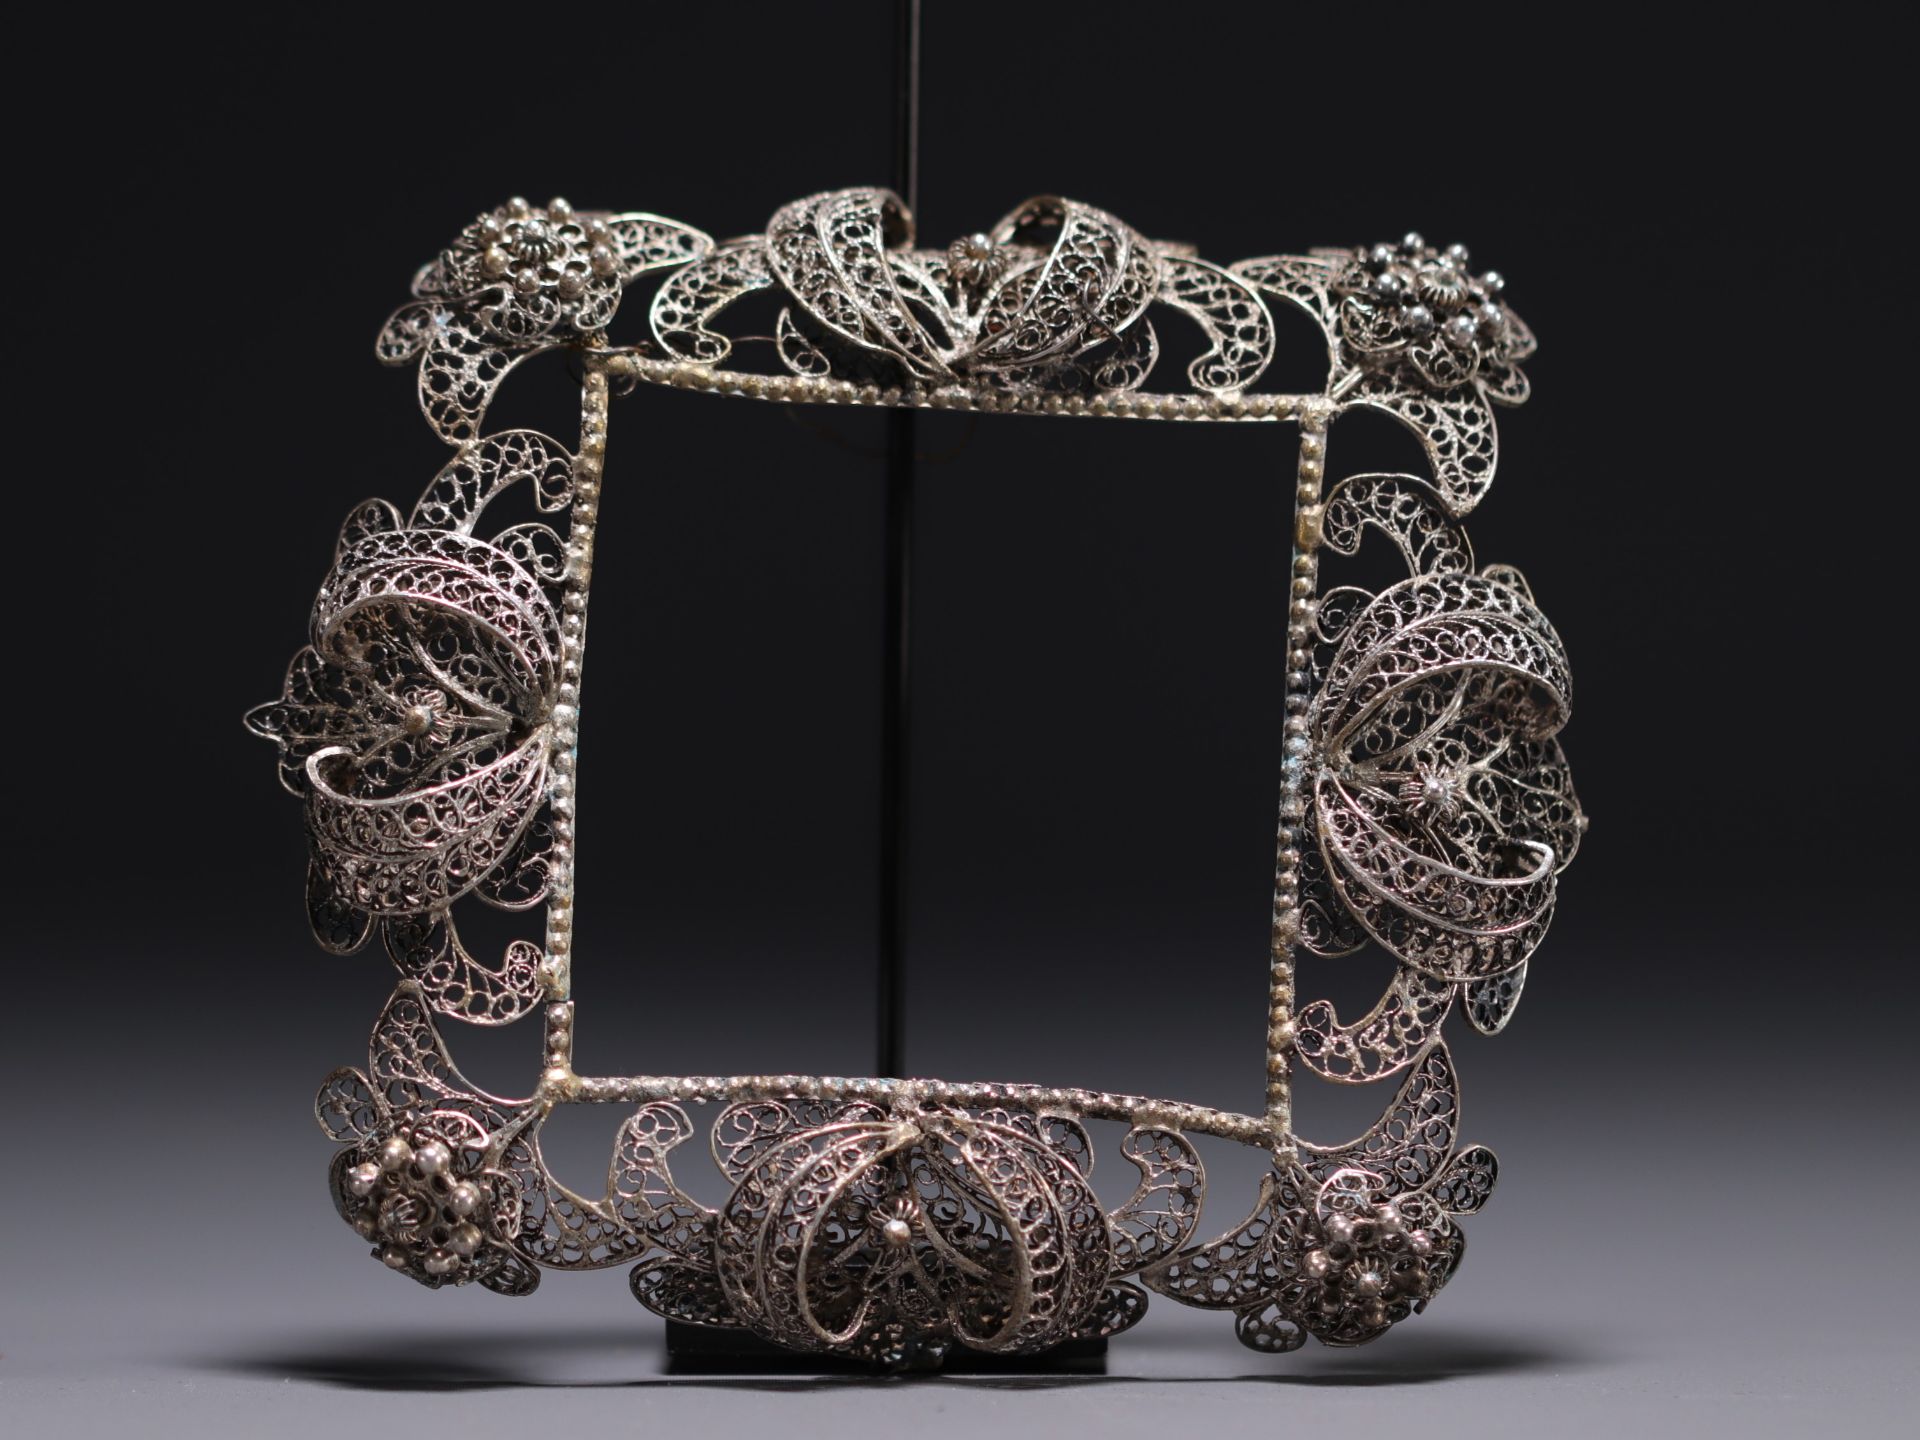 Pair of silver filigree frames, Russia, 18th century. - Image 3 of 3